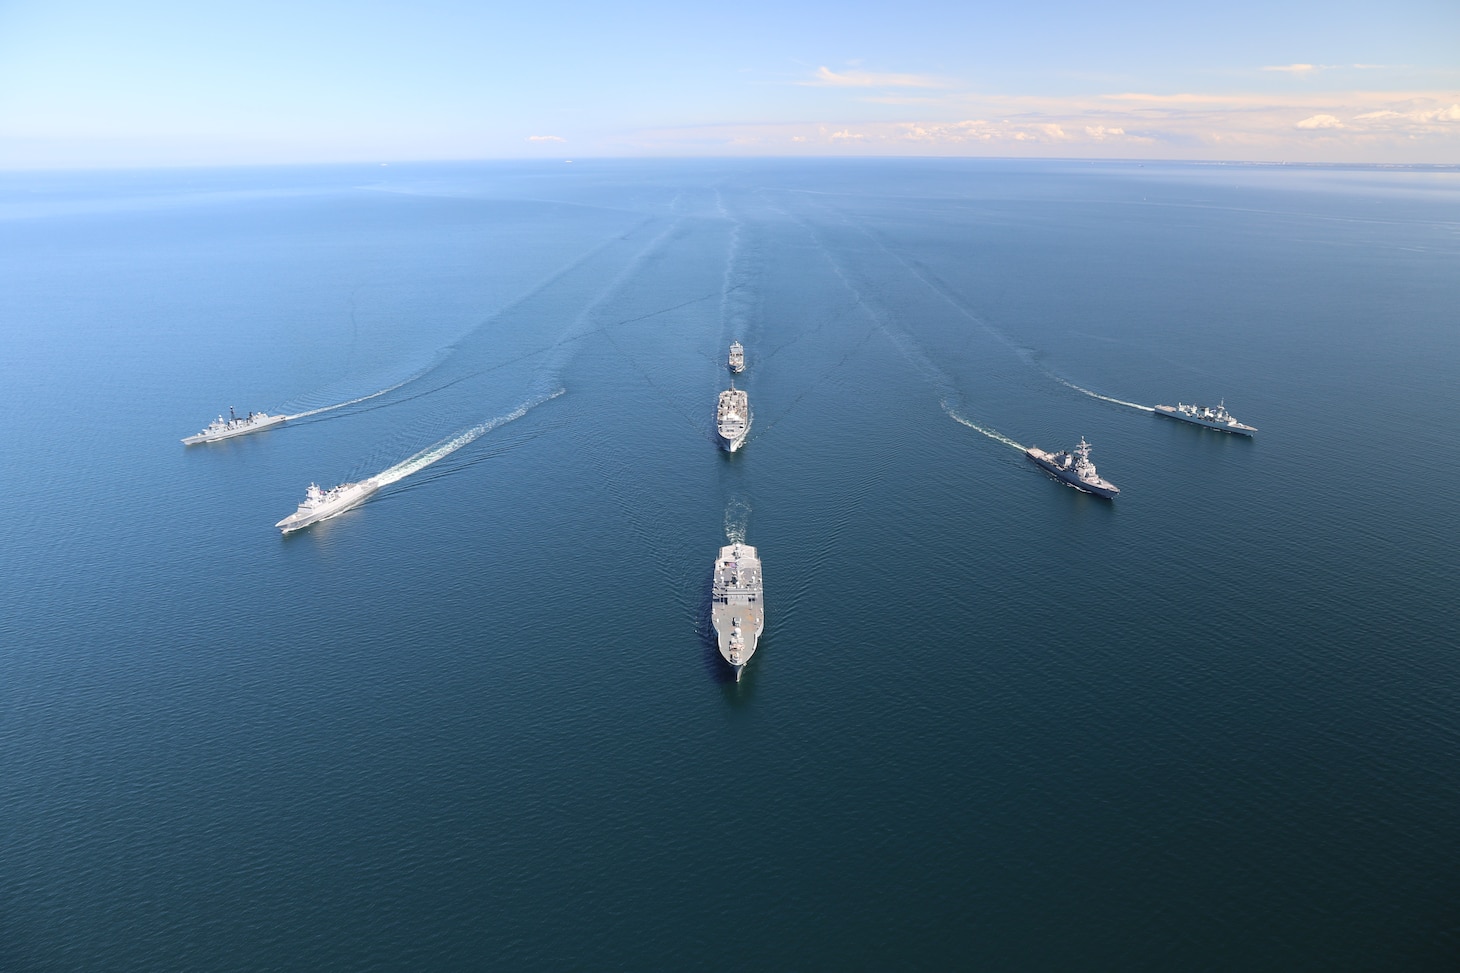 BALTIC SEA (June 8, 2020) Ships from nations participating in exercise Baltic Operations (BALTOPS) 2020 sail in formation while in the Baltic Sea, June 8, 2020. The ships pictured are (in alphabetical order by home nation): the Royal Canadian Navy Halifax-class frigate HMCS Fredericton (FFH 337), the German Navy Bremen-class frigate FGS Luebeck (F214), the German Navy Rhone-Class replenishment oiler FGS Rhoen (A1443), the Royal Norwegian Navy Fridtjof Nansen-class frigate HNoMS Otto Suerdrup (F312), the U.S. Navy Blue Ridge-class command and control ship USS Mount Whitney (LCC 20), the U.S. Navy Arleigh Burke-class guided-missile destroyer USS Donald Cook (DDG 75), and the U.S. Navy Supply-class fast-combat support ship USNS Supply (T-AOE 6). BALTOPS is the premier annual maritime-focused exercise in the Baltic Region, marking the 49th year of one of the largest exercises in Northern Europe enhancing flexibility and interoperability among allied and partner nations. (Photo courtesy of the German Navy)